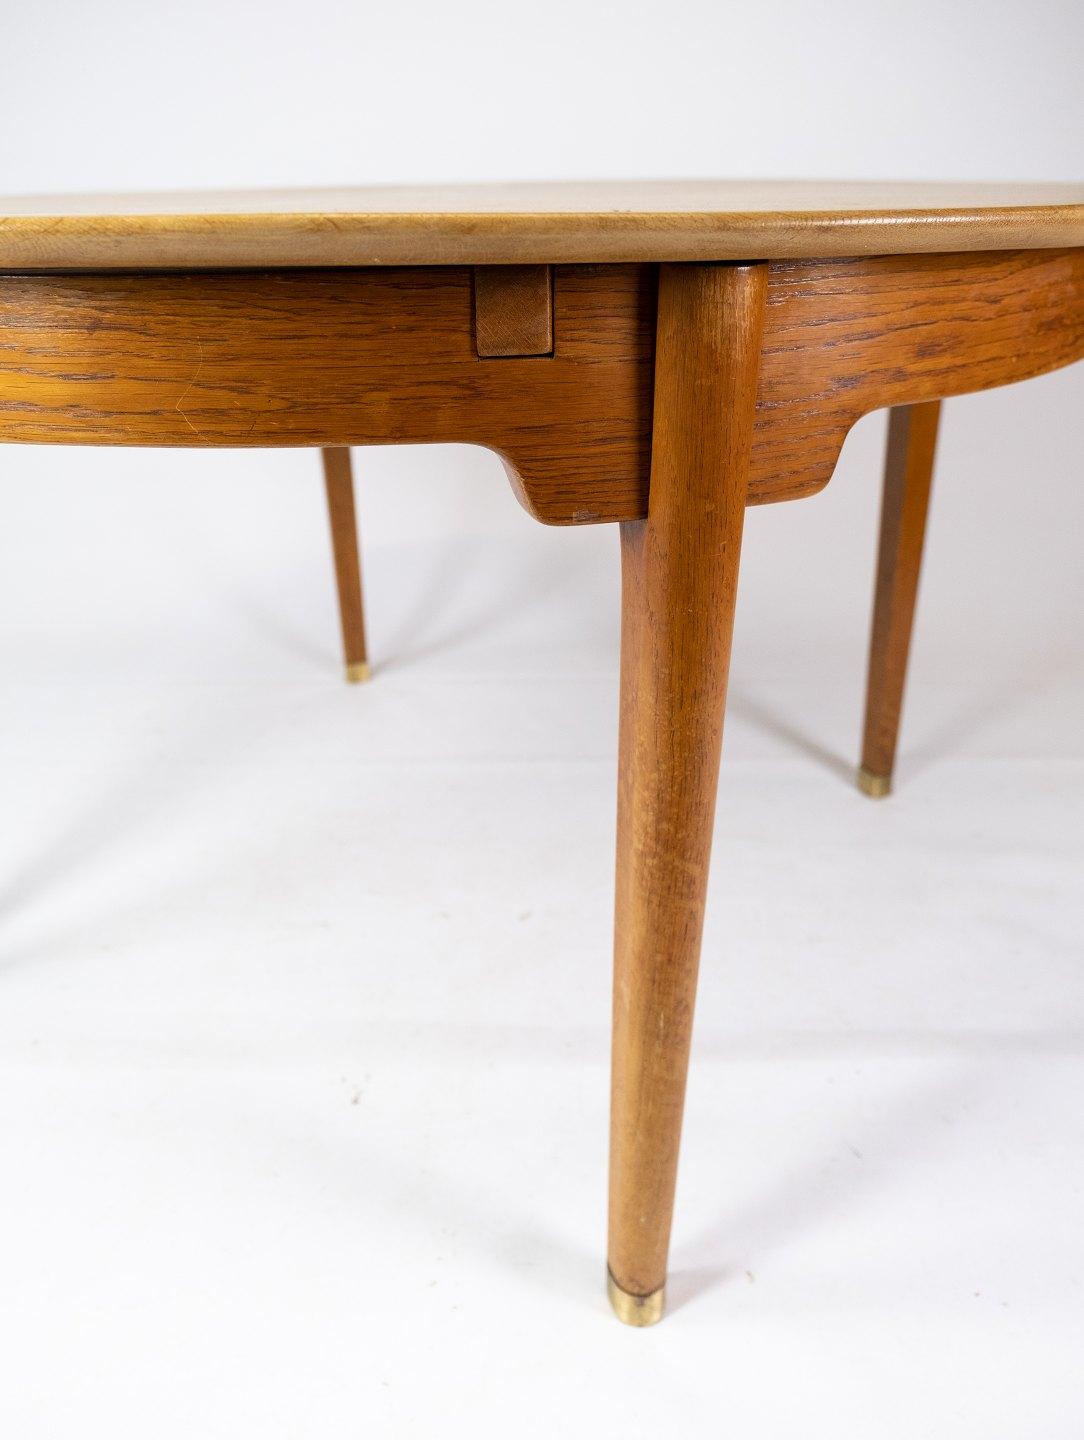 Dining table in oak of Danish design from the 1960s. The table is in great vintage condition.
Extensions measures 50 cm each.